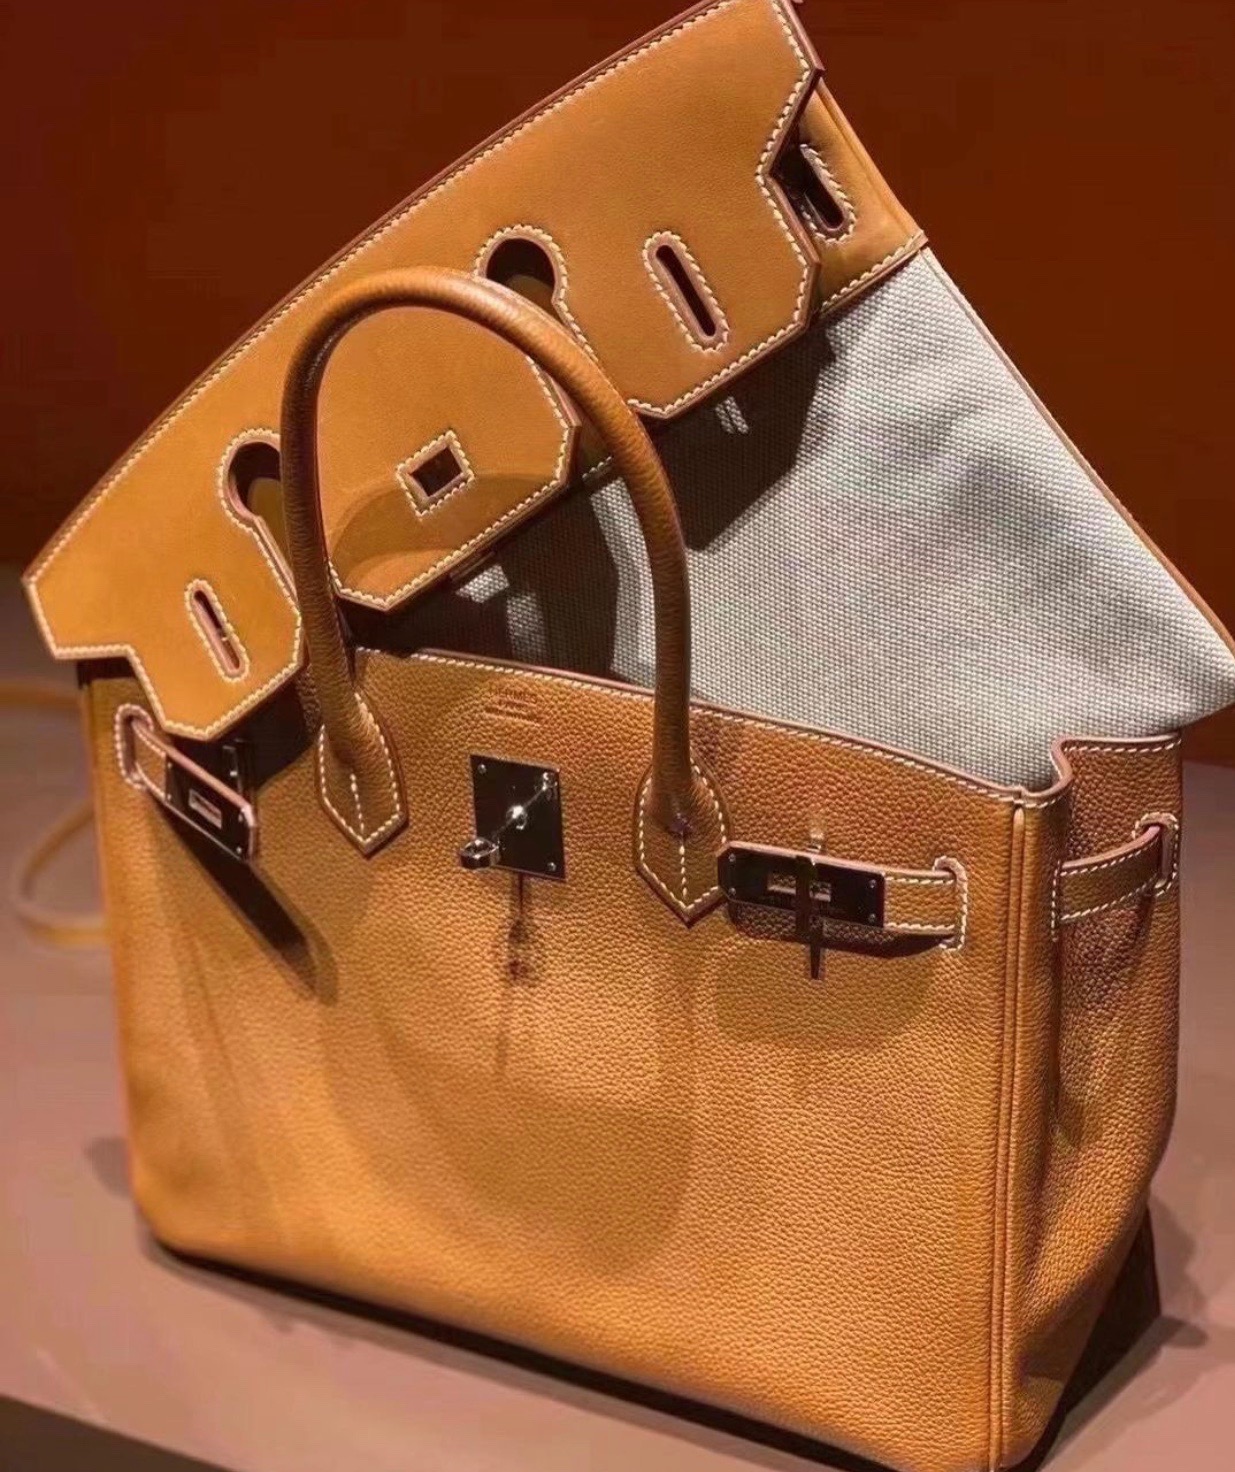 The new Hermès Birkin 3 in 1 bag. What are your thoughts? Comment belo